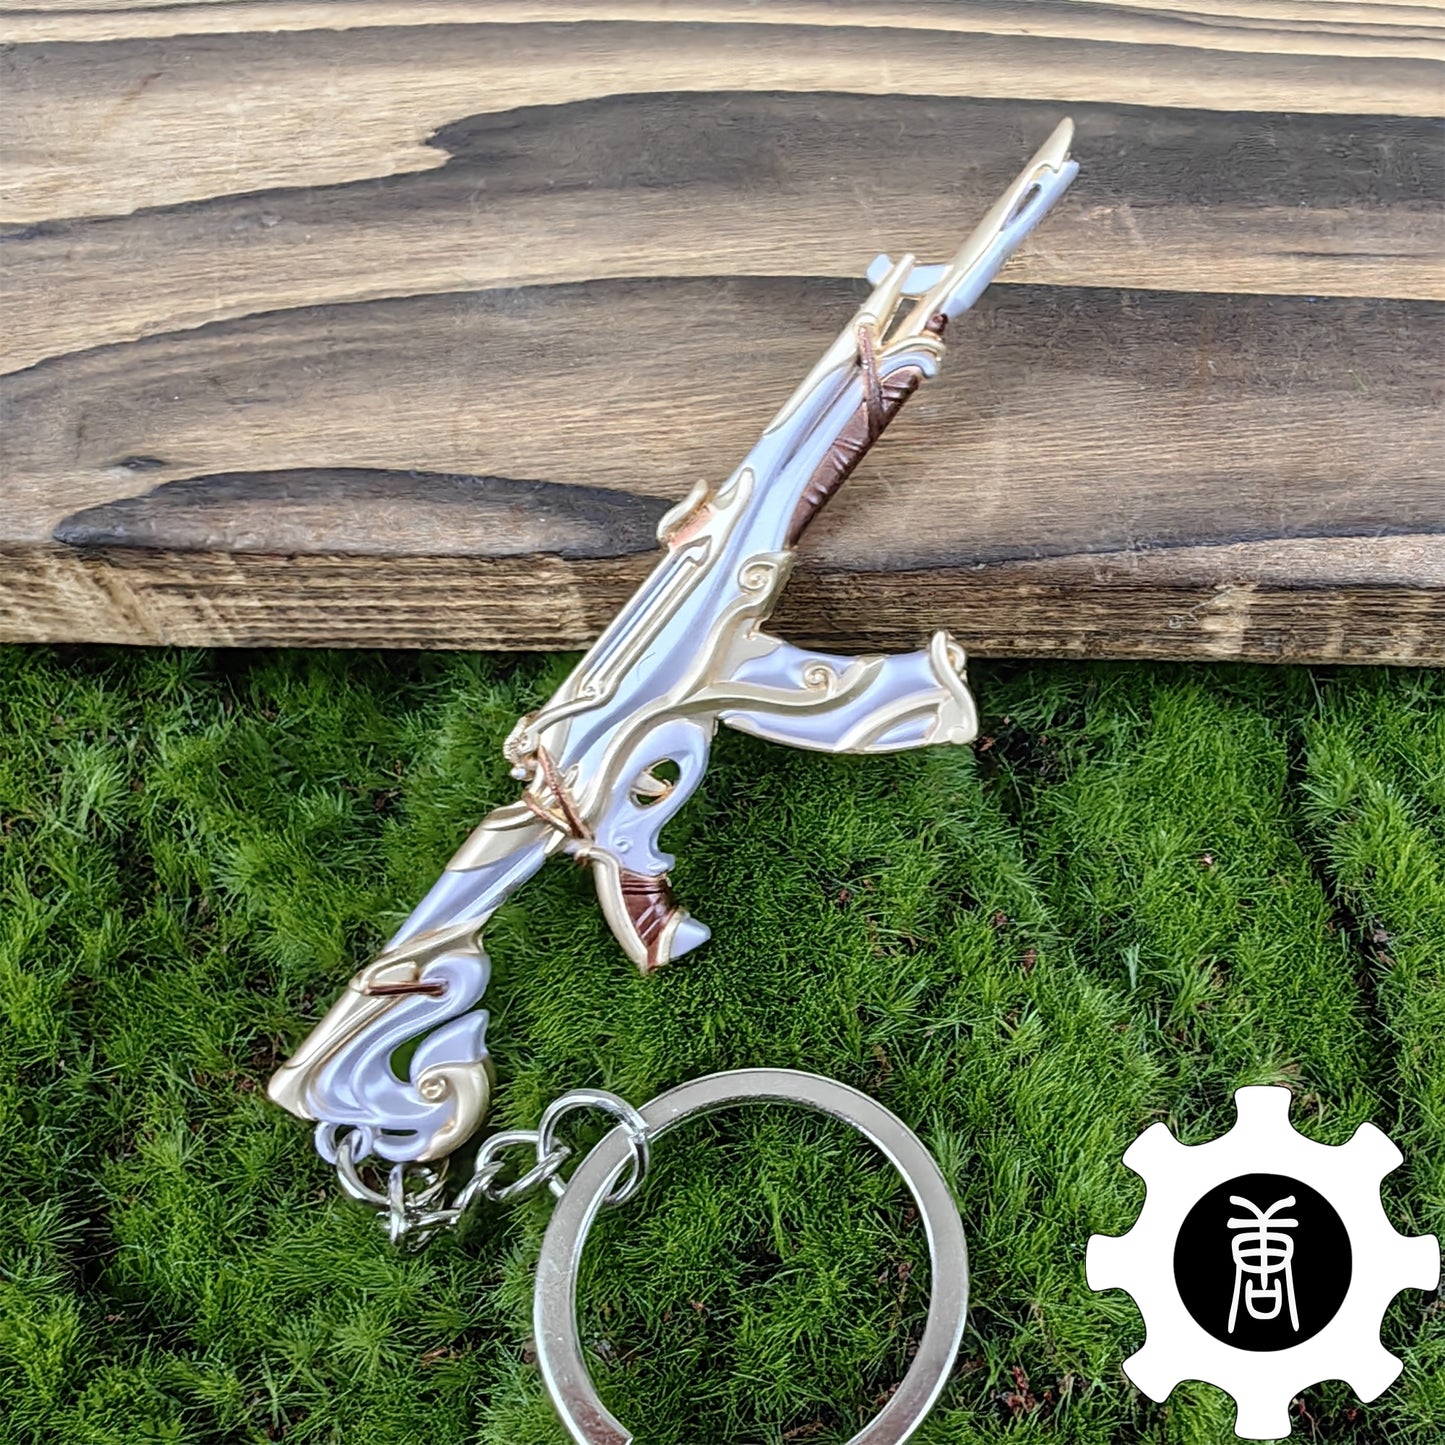 Imperium Skin Gun Weapon Keychain Cool Pendant Gift 5 In 1 Pack